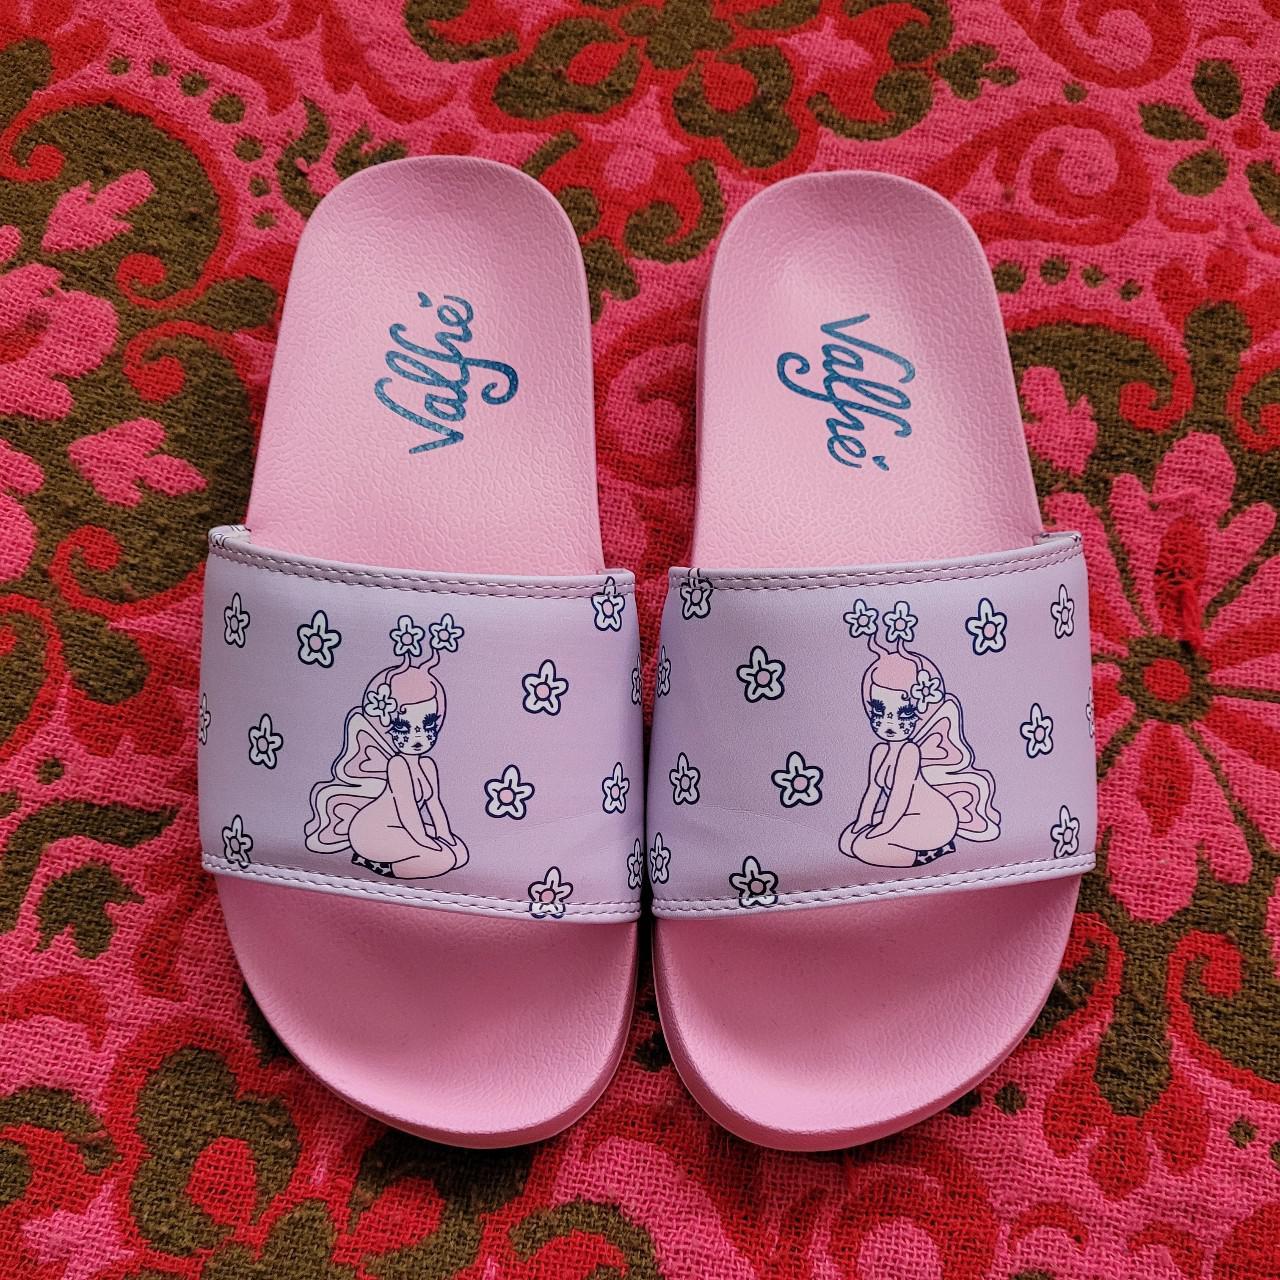 Product Image 4 - Valfre Pink Fairycore Slides. Cute